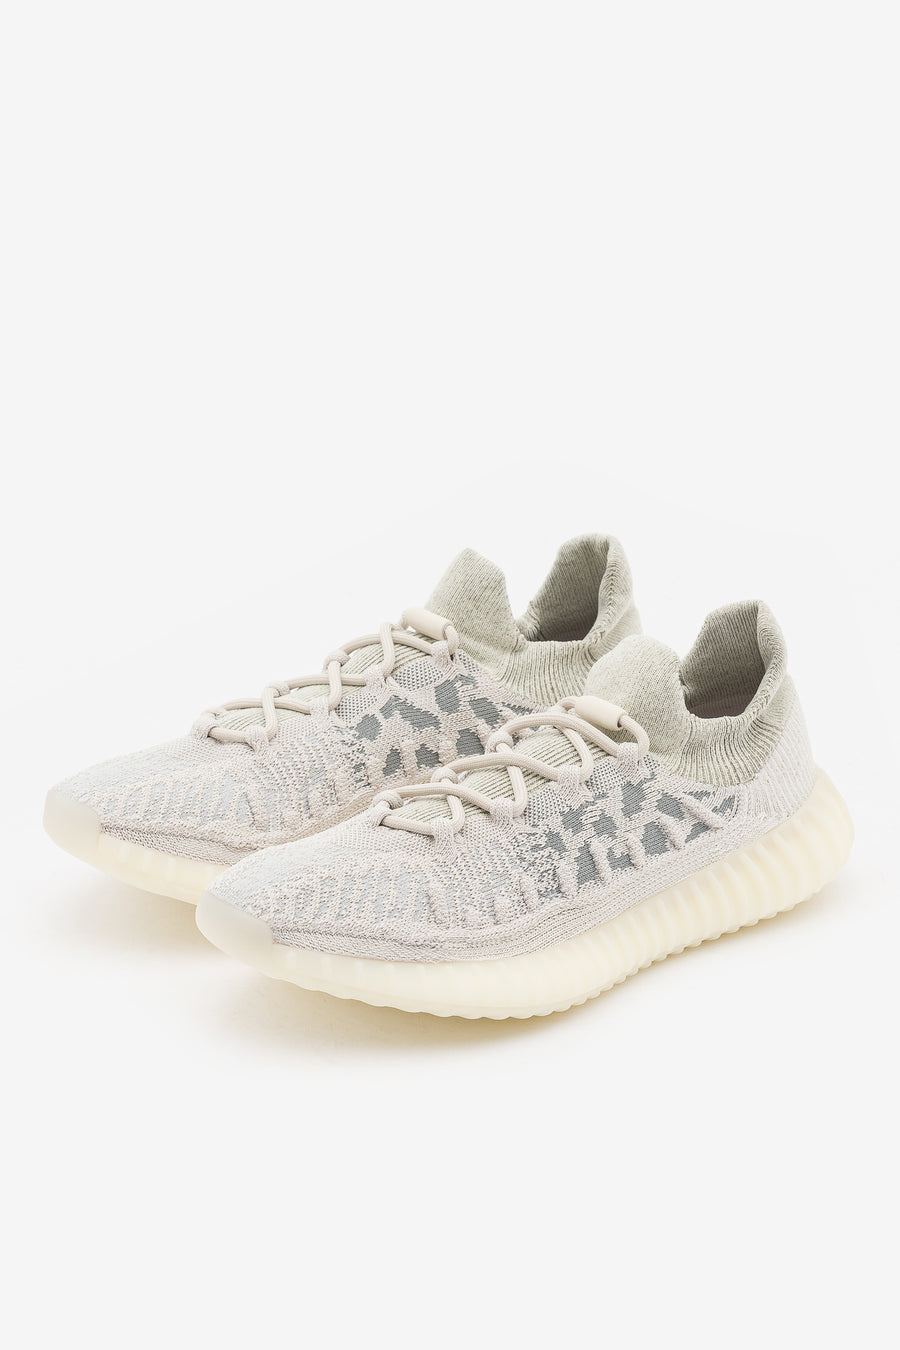 YEEZY: Off-White YZY 350 V2 CMPT Sneakers